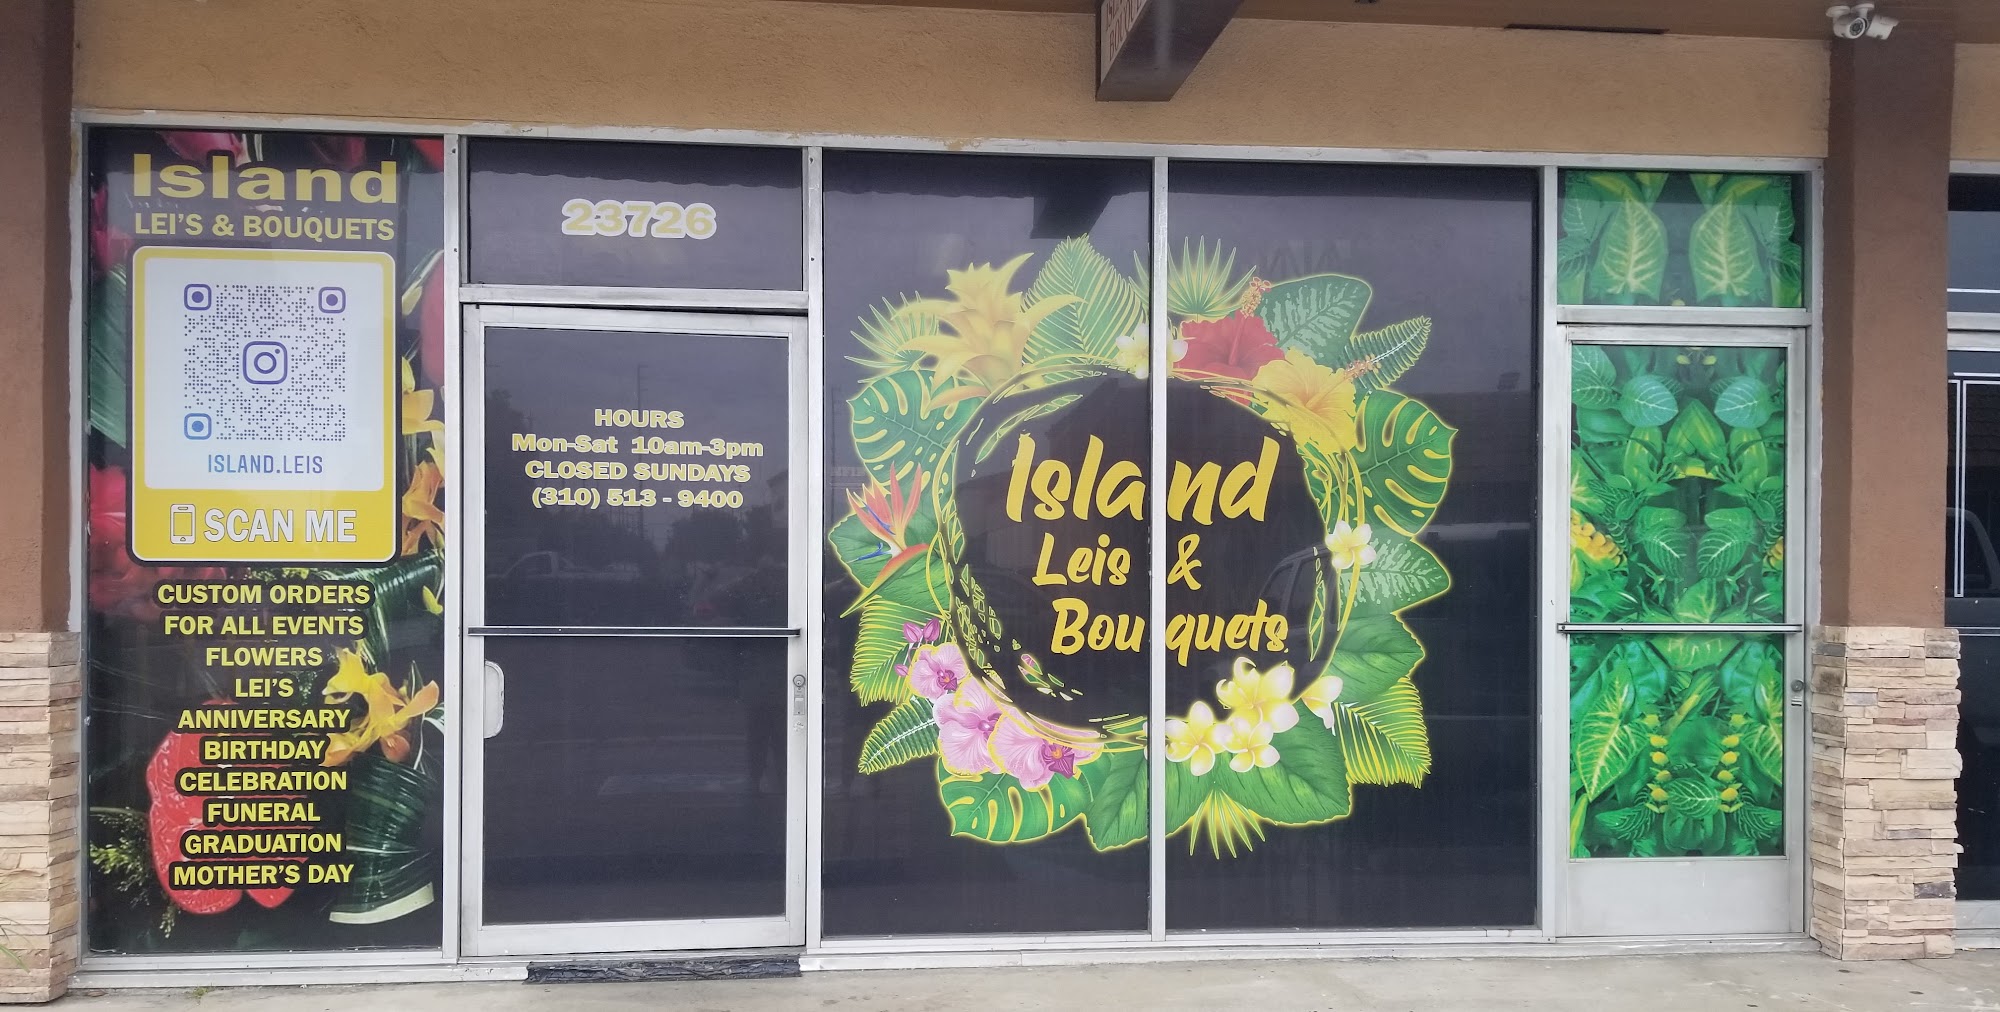 Island Leis & Bouquets